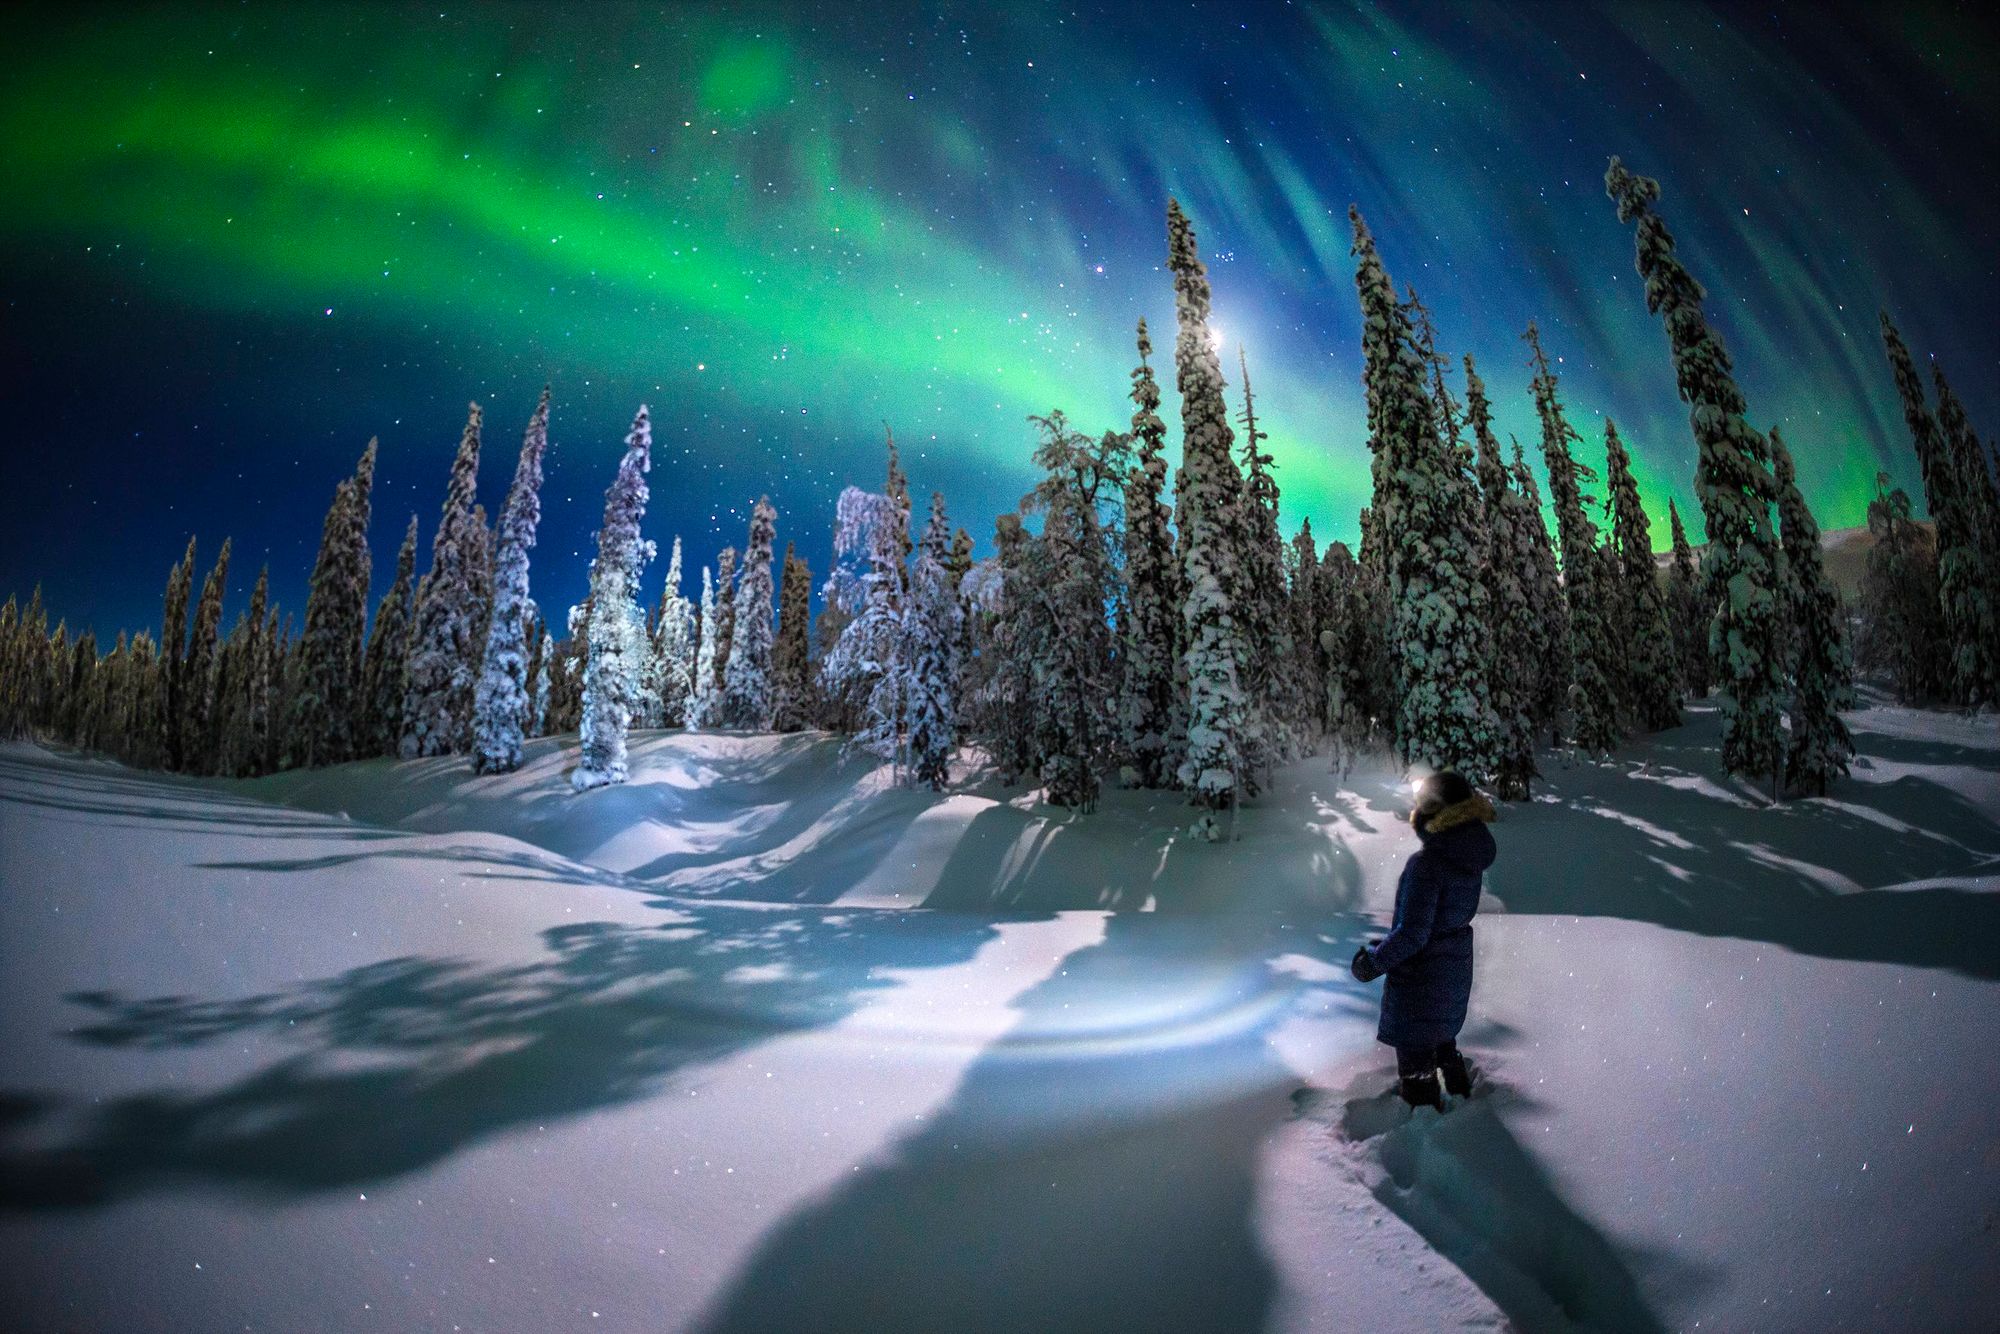 10 of the Most Frequently-Asked Questions About the Northern Lights